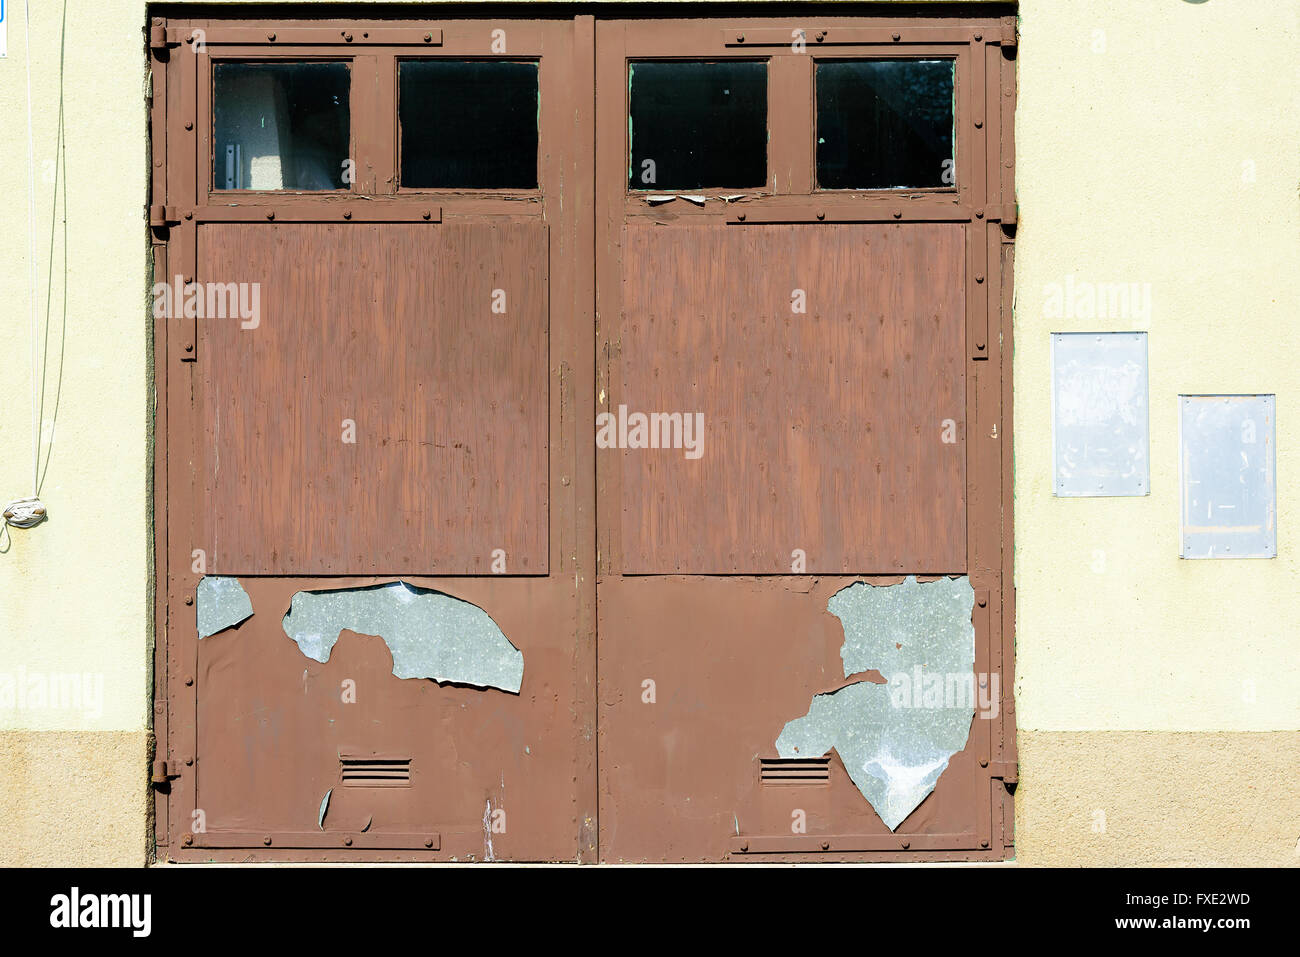 Brown garage door with flaking paint and weathered appearance. Empty signboards beside the door. Stock Photo